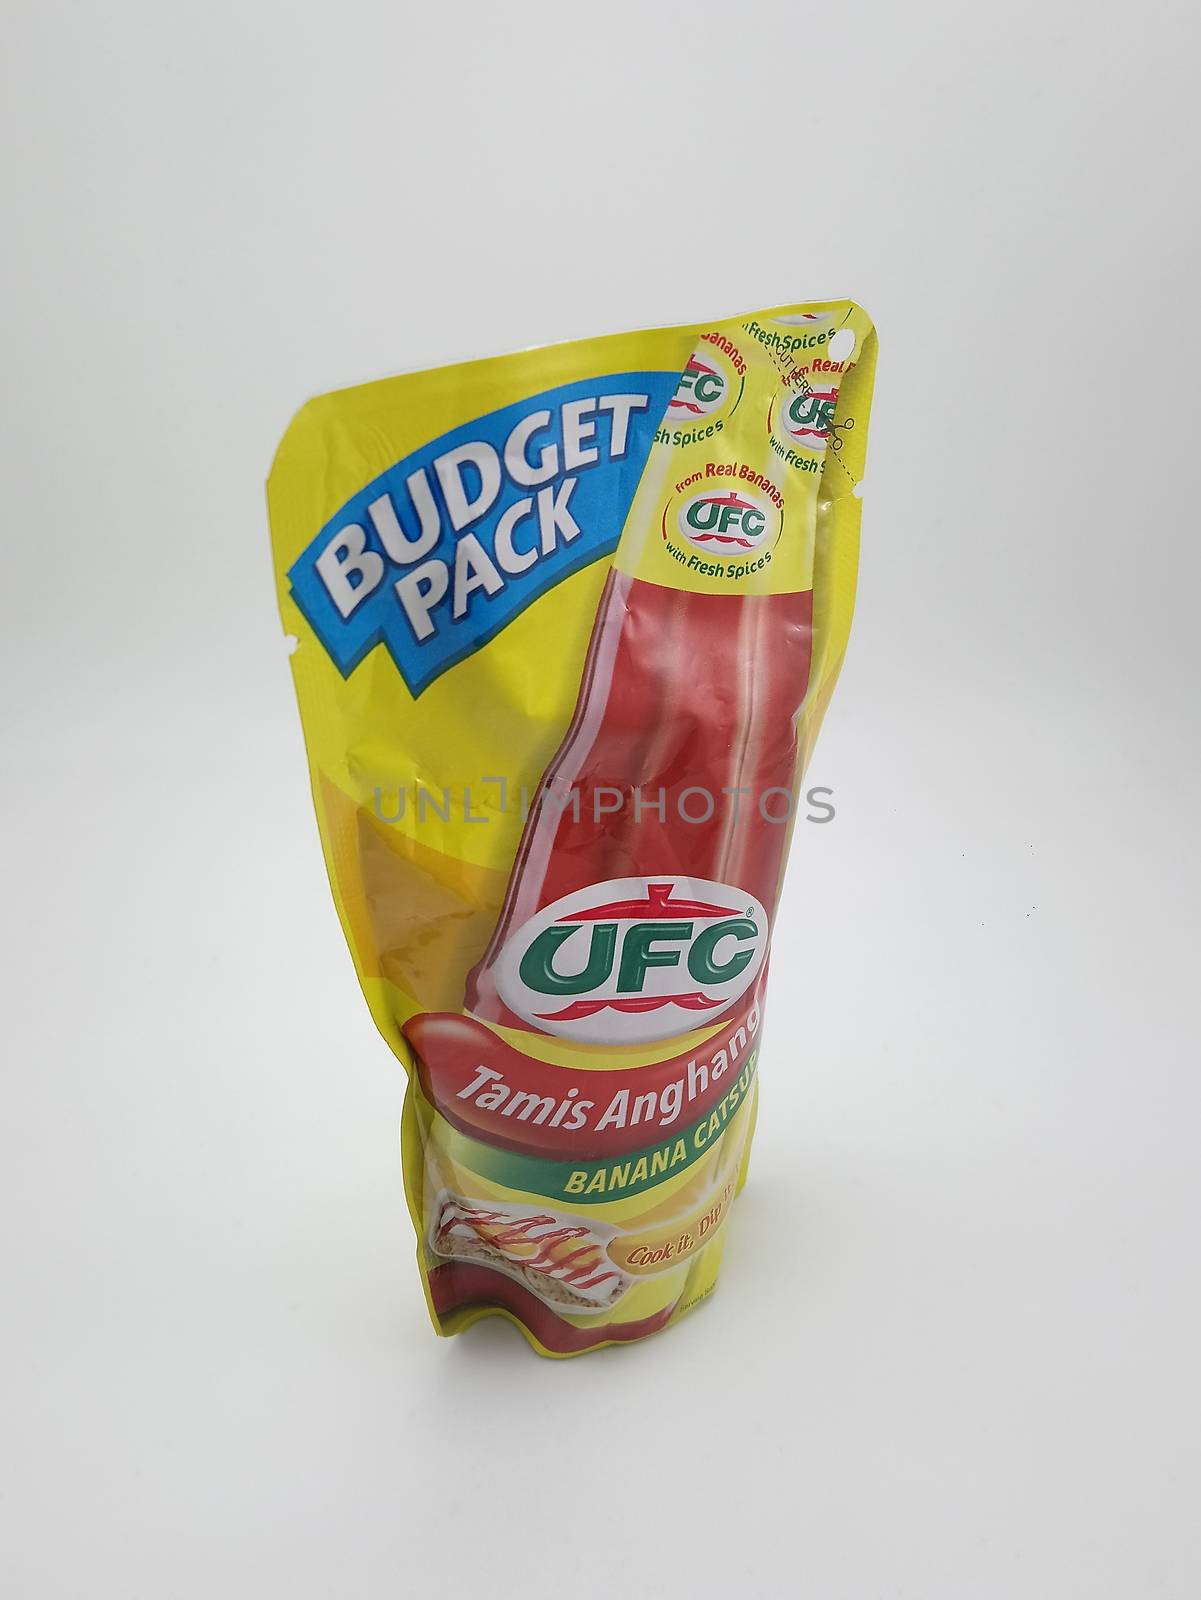 UFC banana ketchup budget pack in Manila, Philippines by imwaltersy